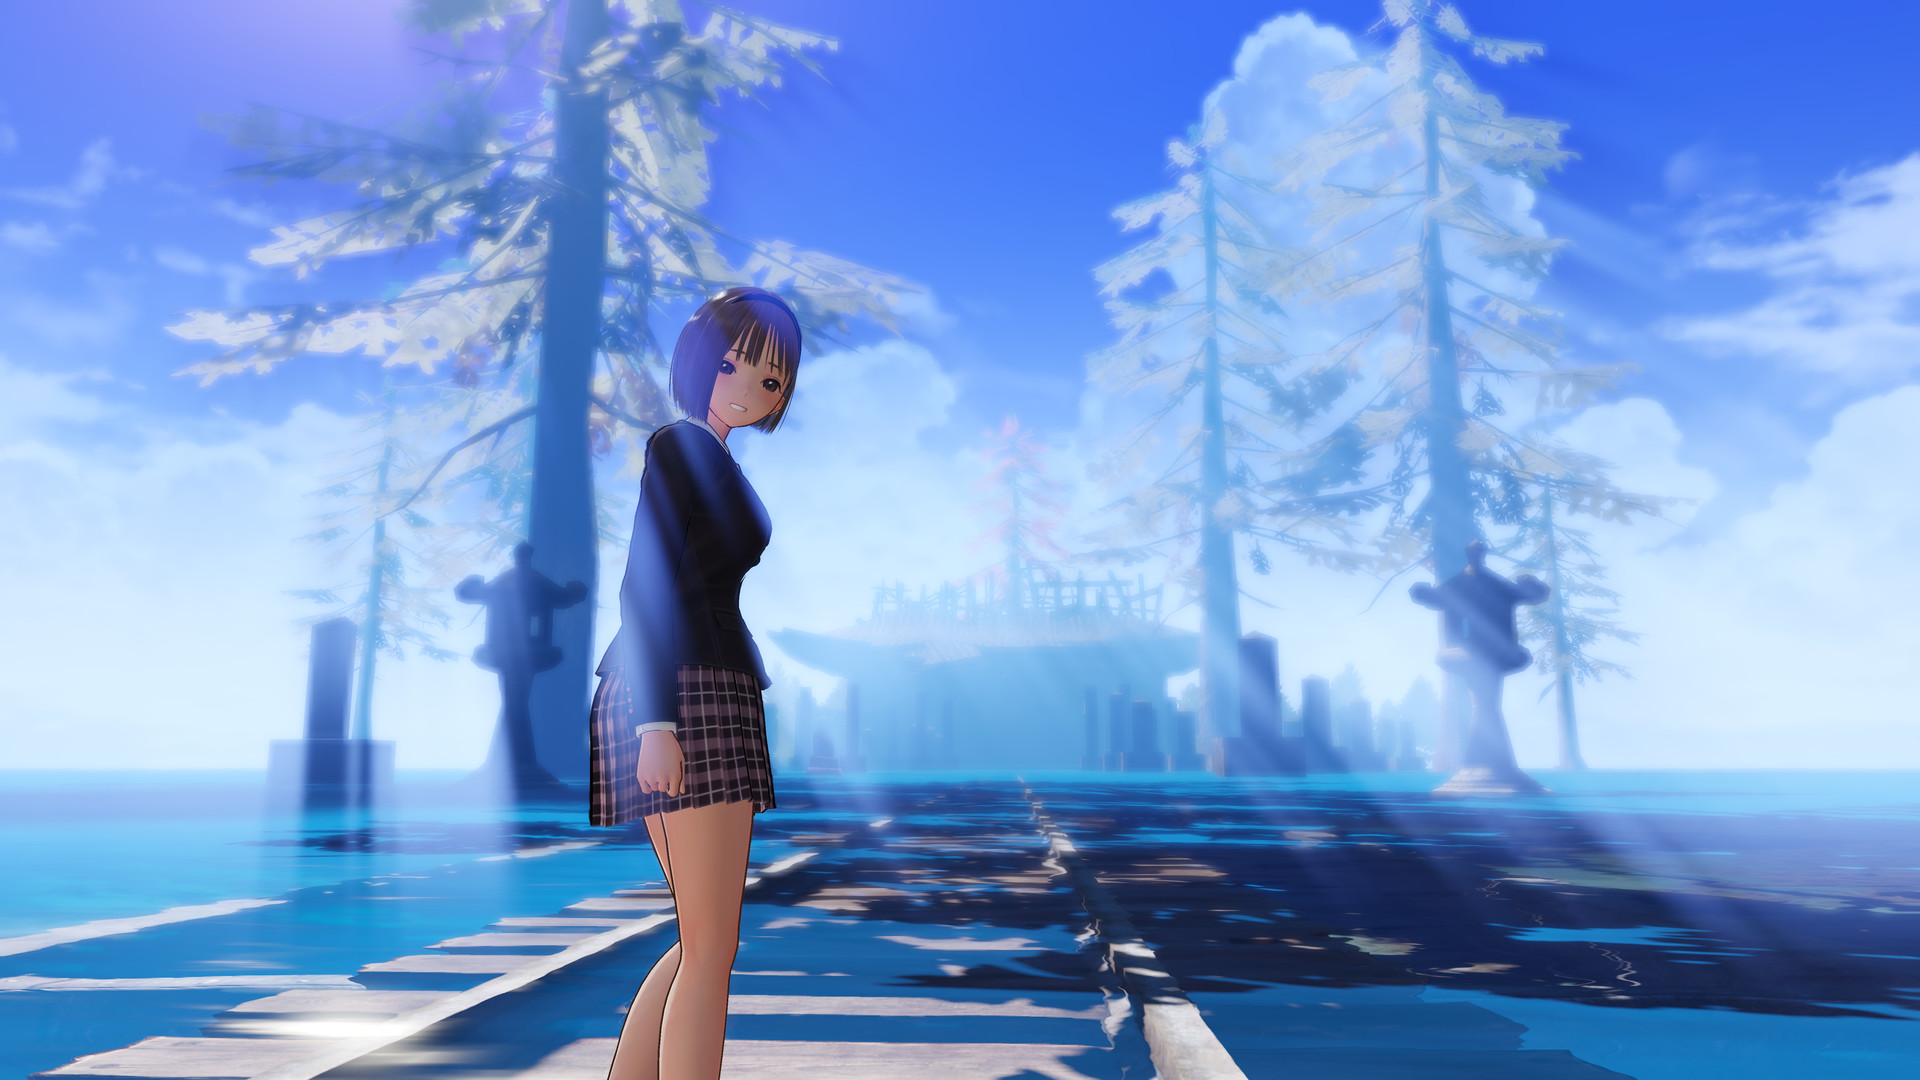 BLUE REFLECTION: Second Light Free Download